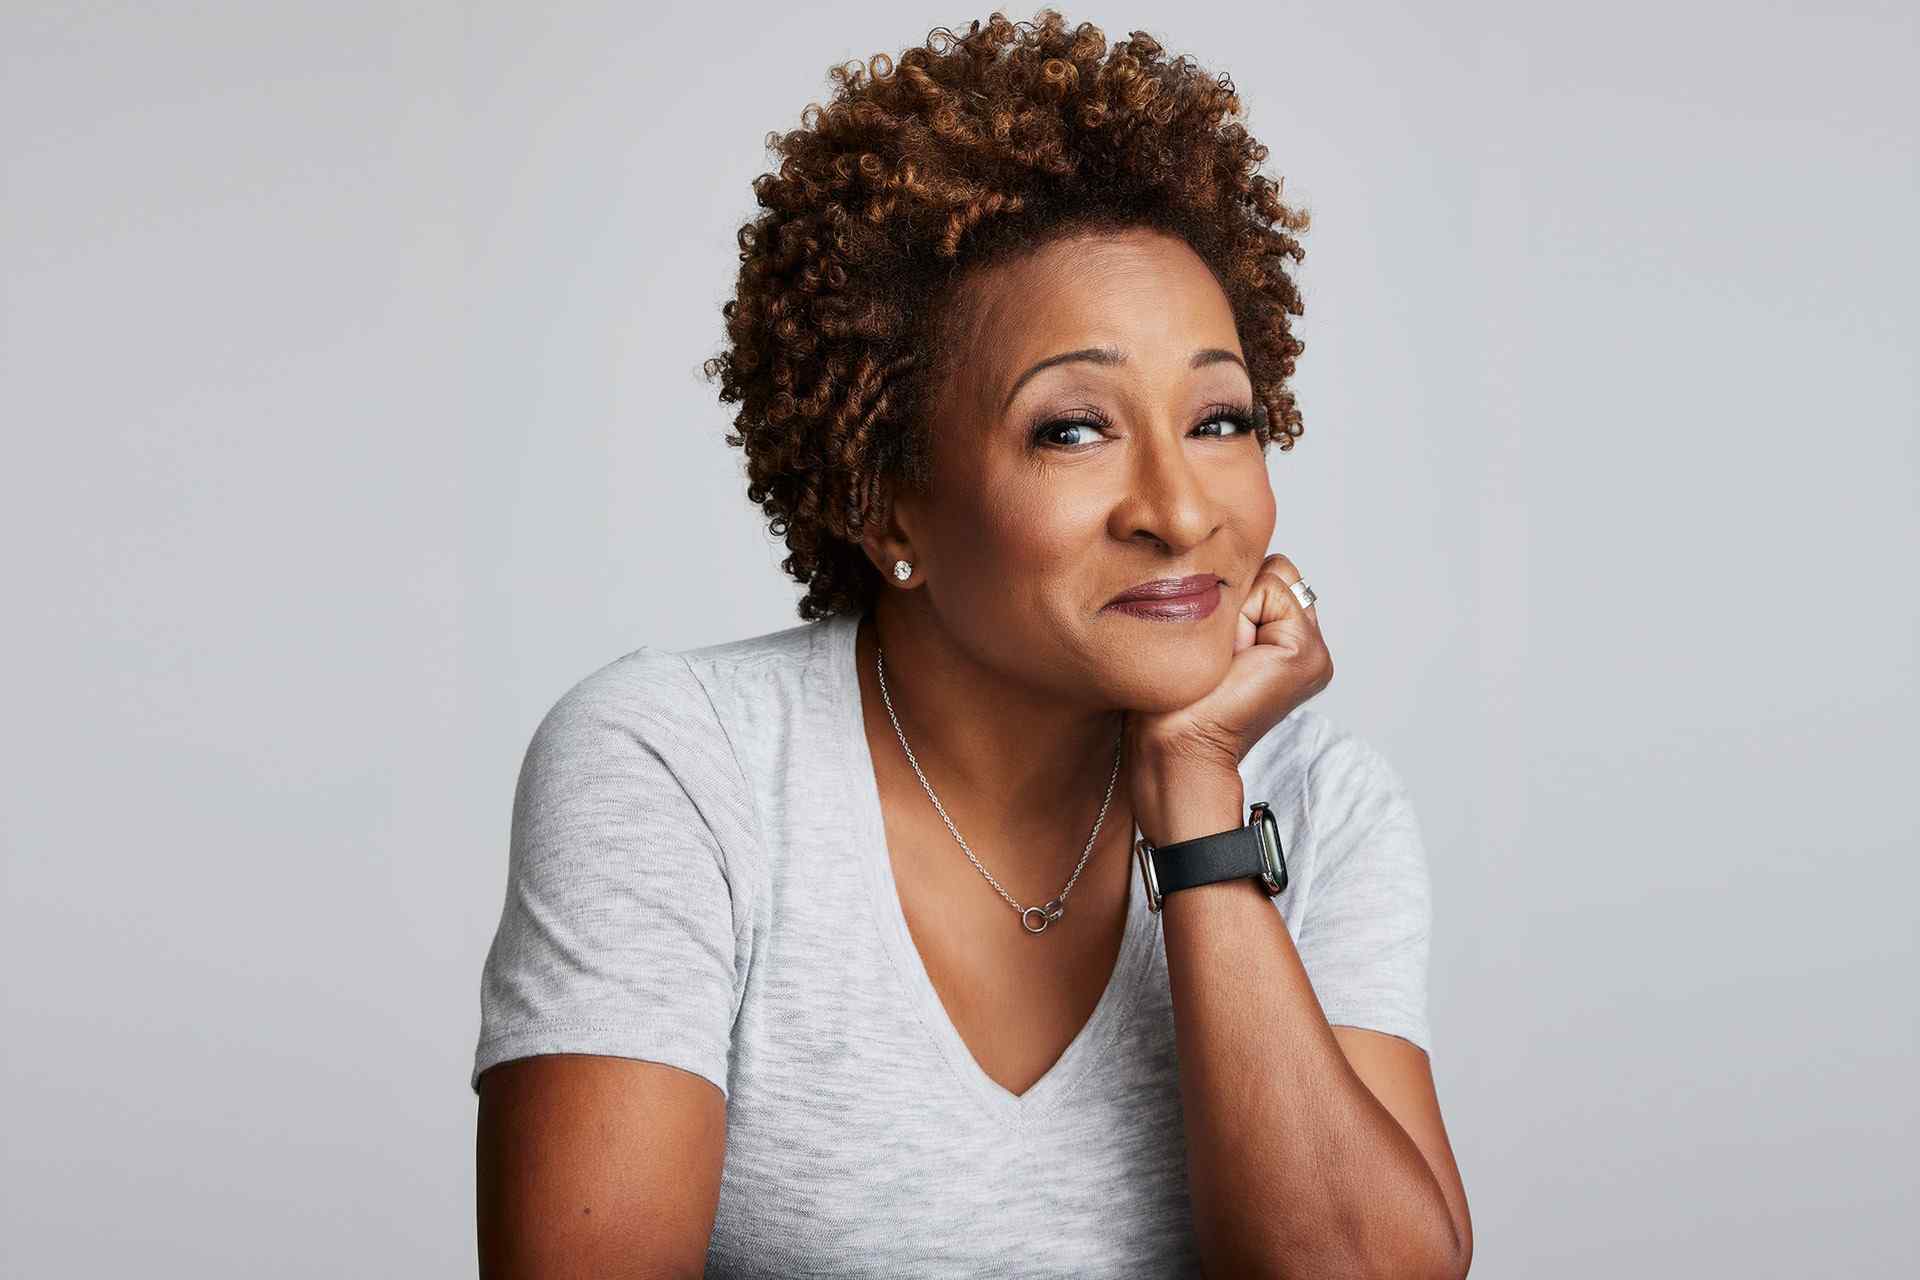 Official Website of Comedian and Television Personality Wanda Sykes